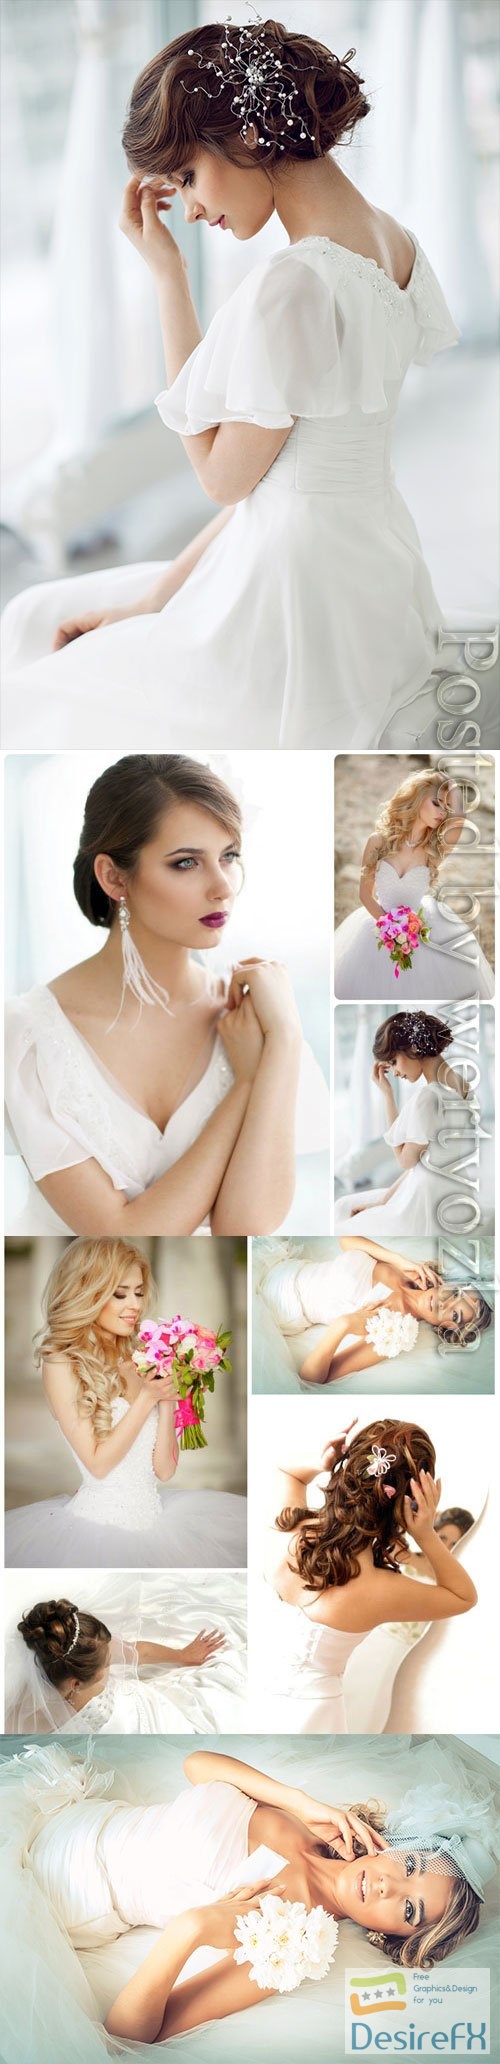 Adorable brides with wedding bouquets stock photo